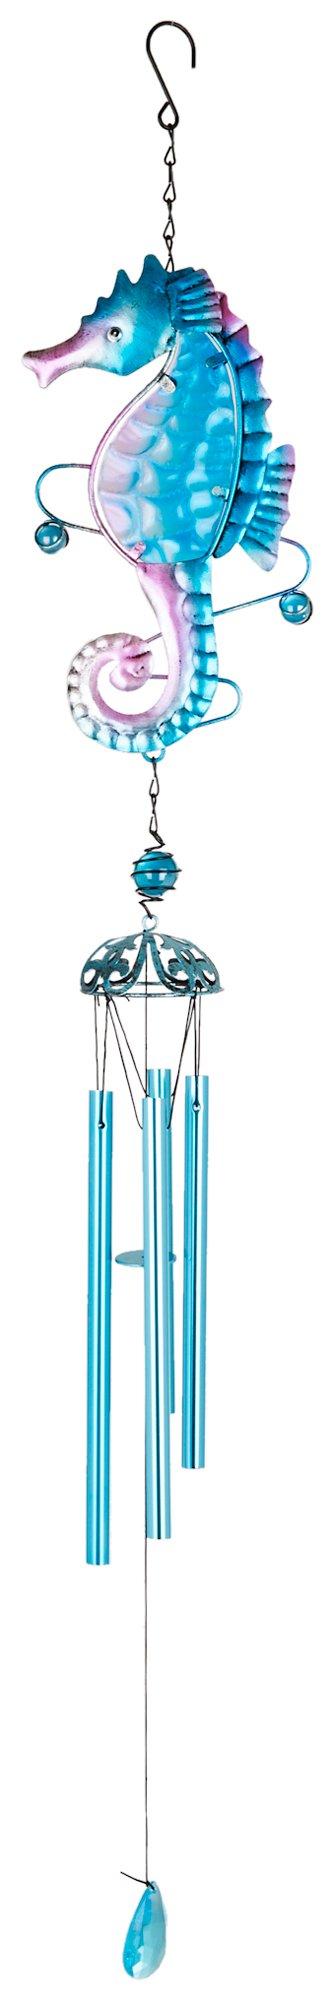 JD Yeatts 36in Seahorse Wind Chime